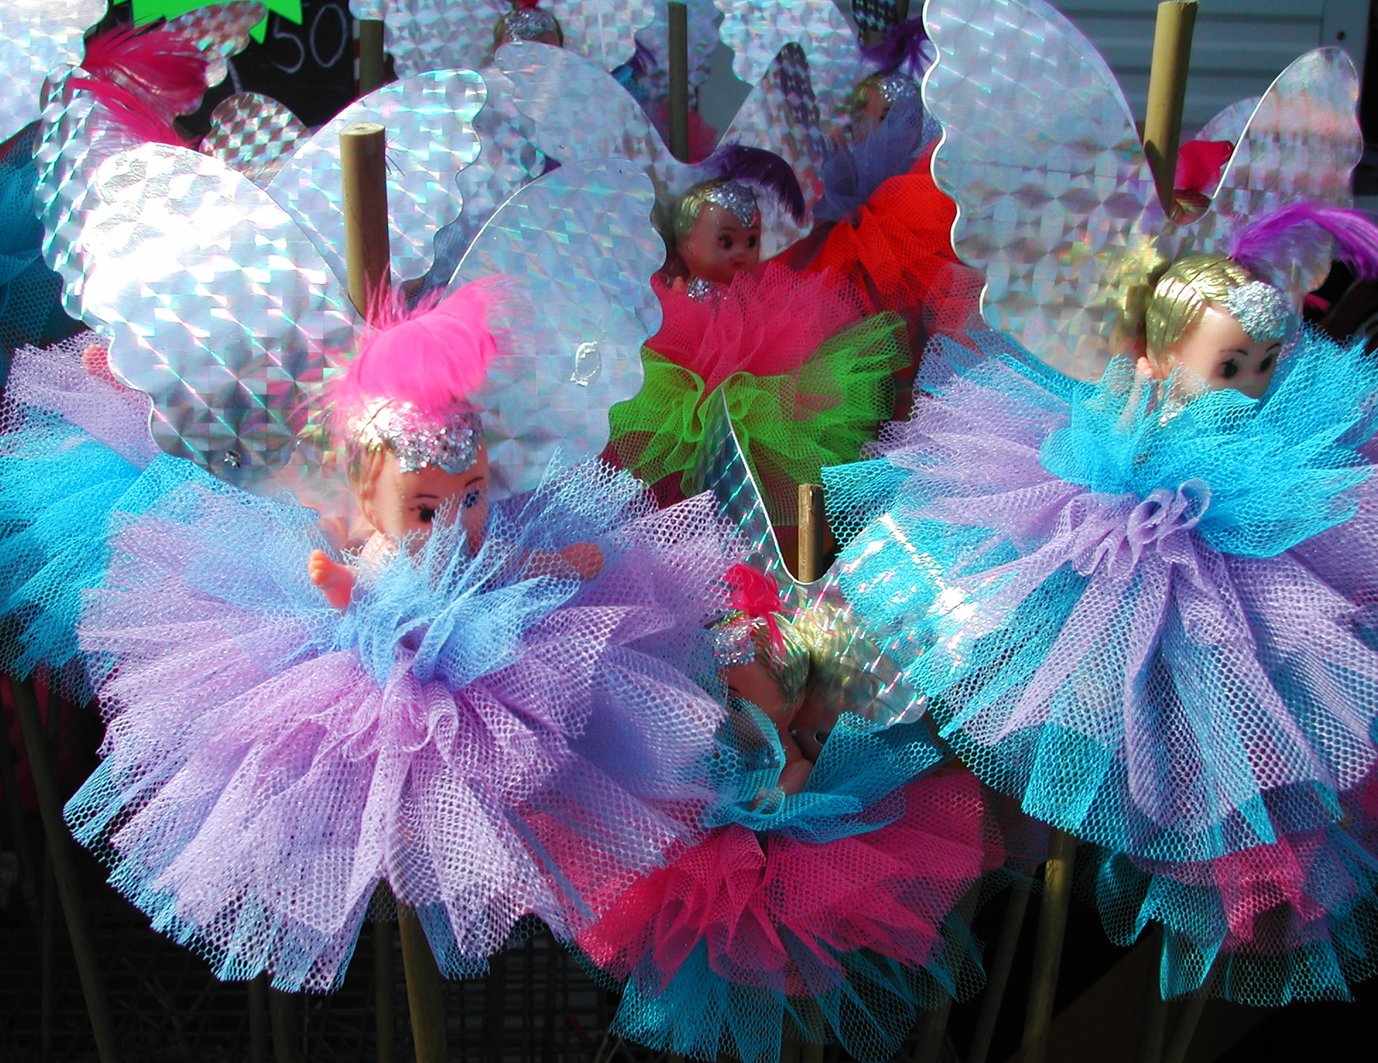 a number of colorful baby doll decorations